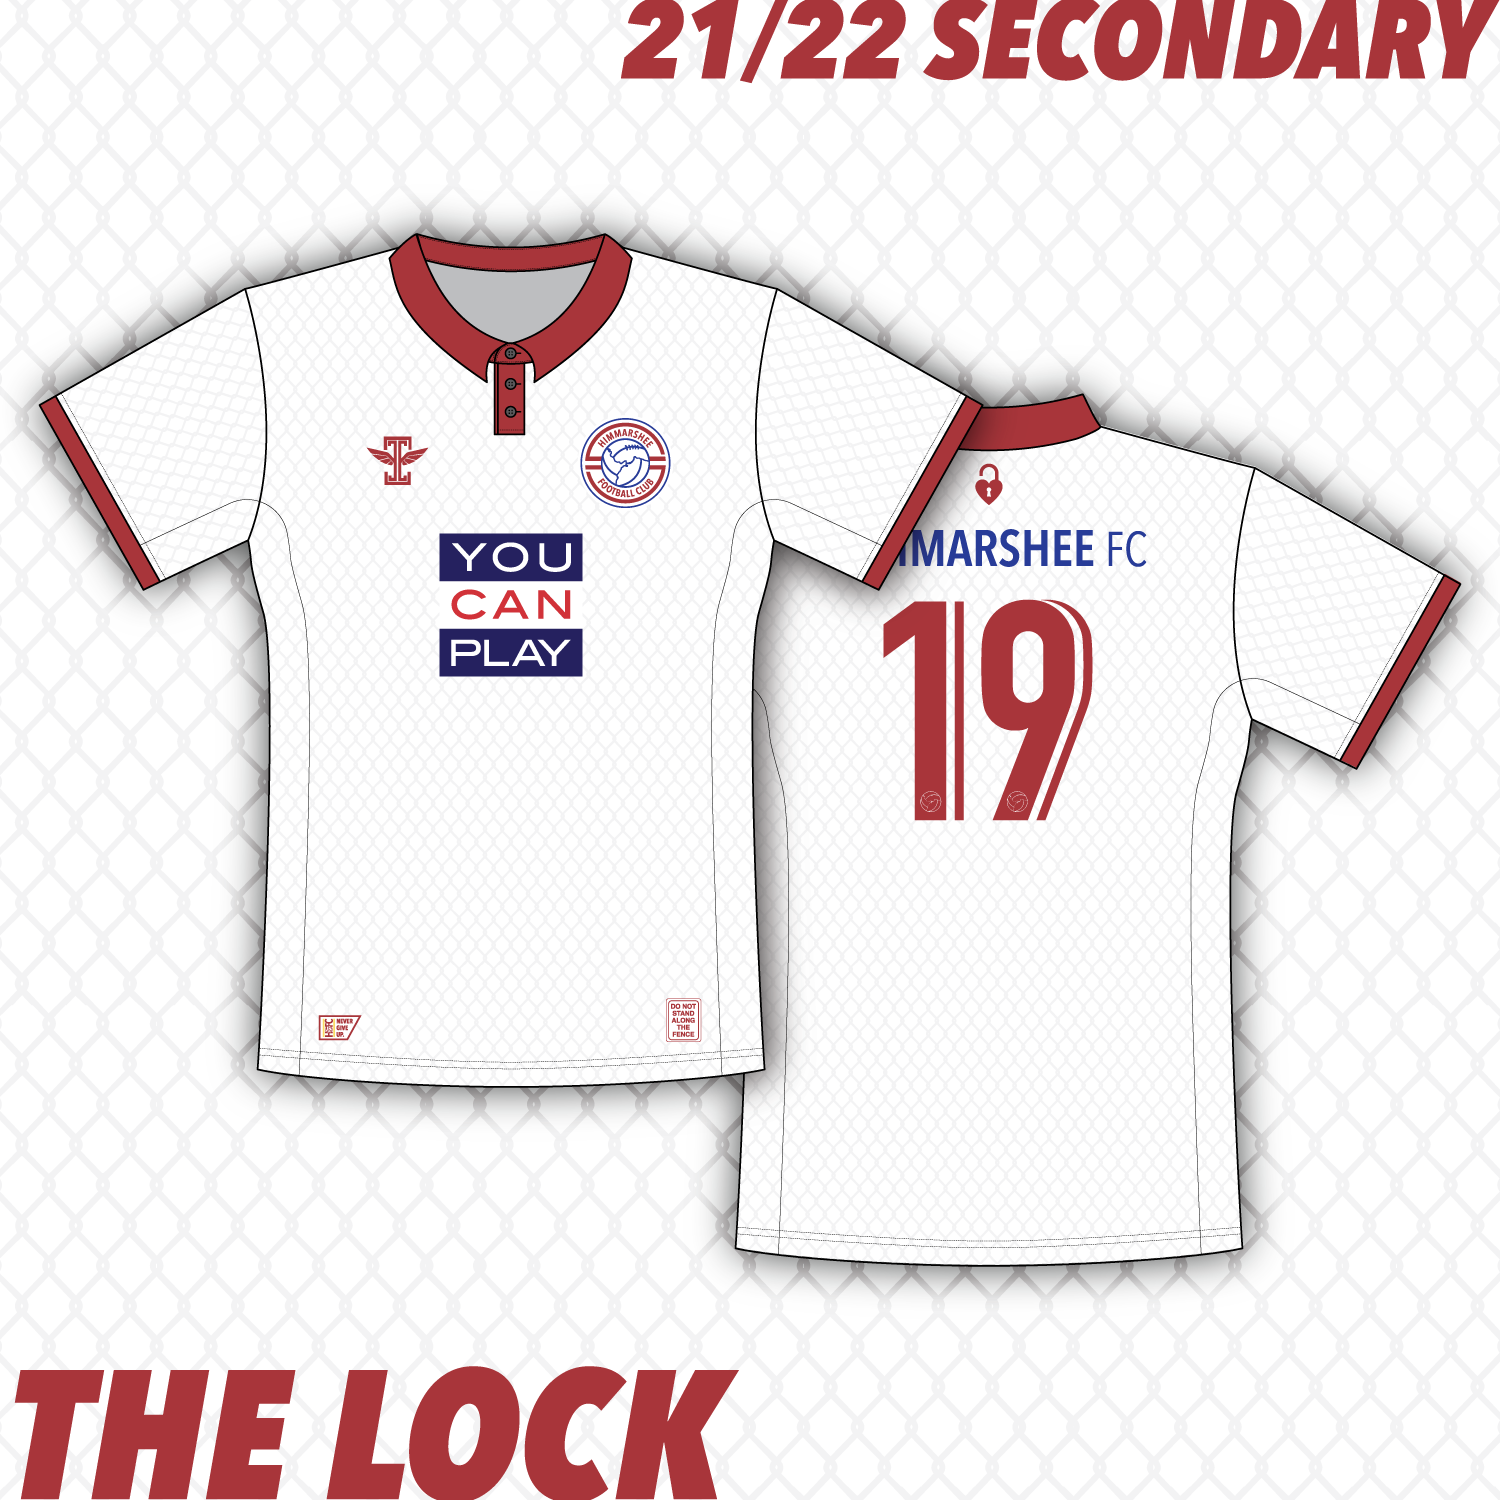 2021/22 HFC Secondary Jersey - (BLANK - NO NUMBER, SIZE S